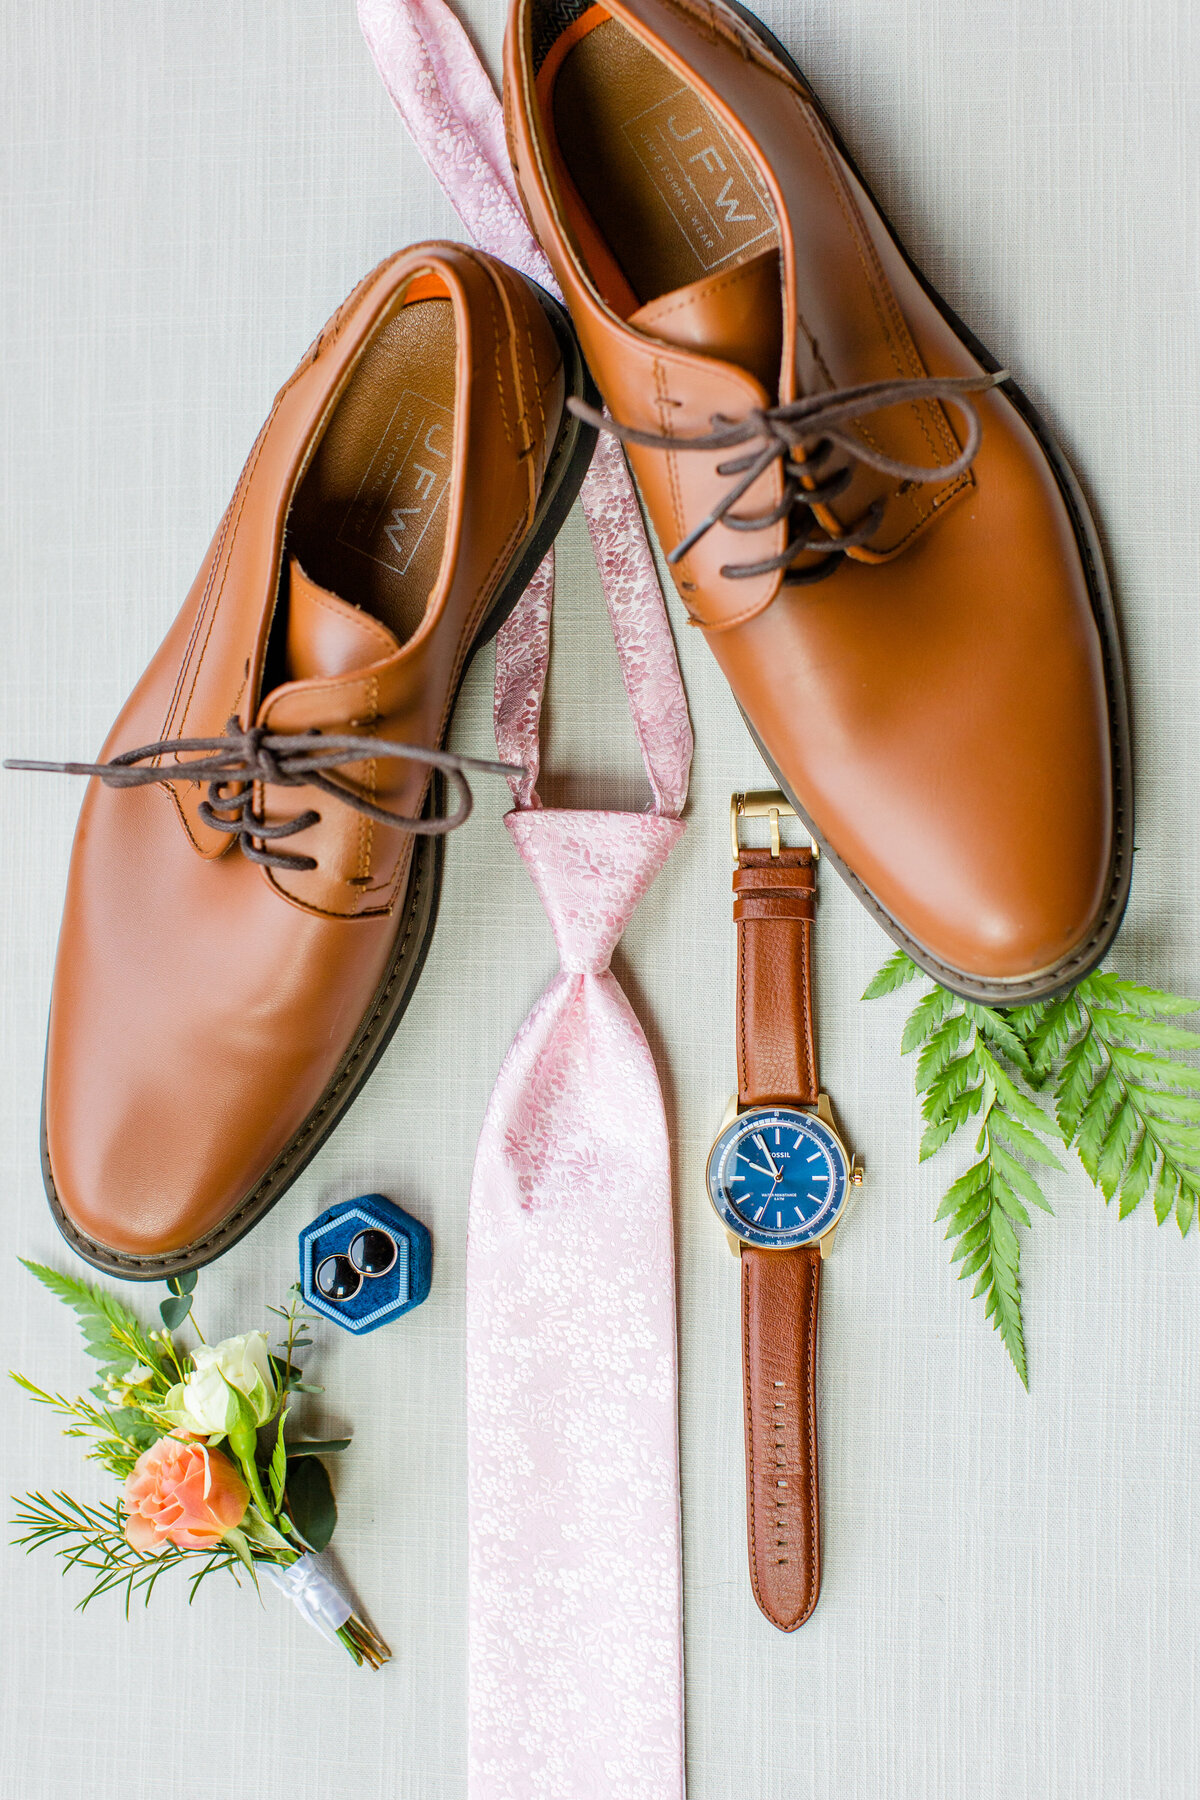 detail photo of groom's tie, shoes watch and ring box